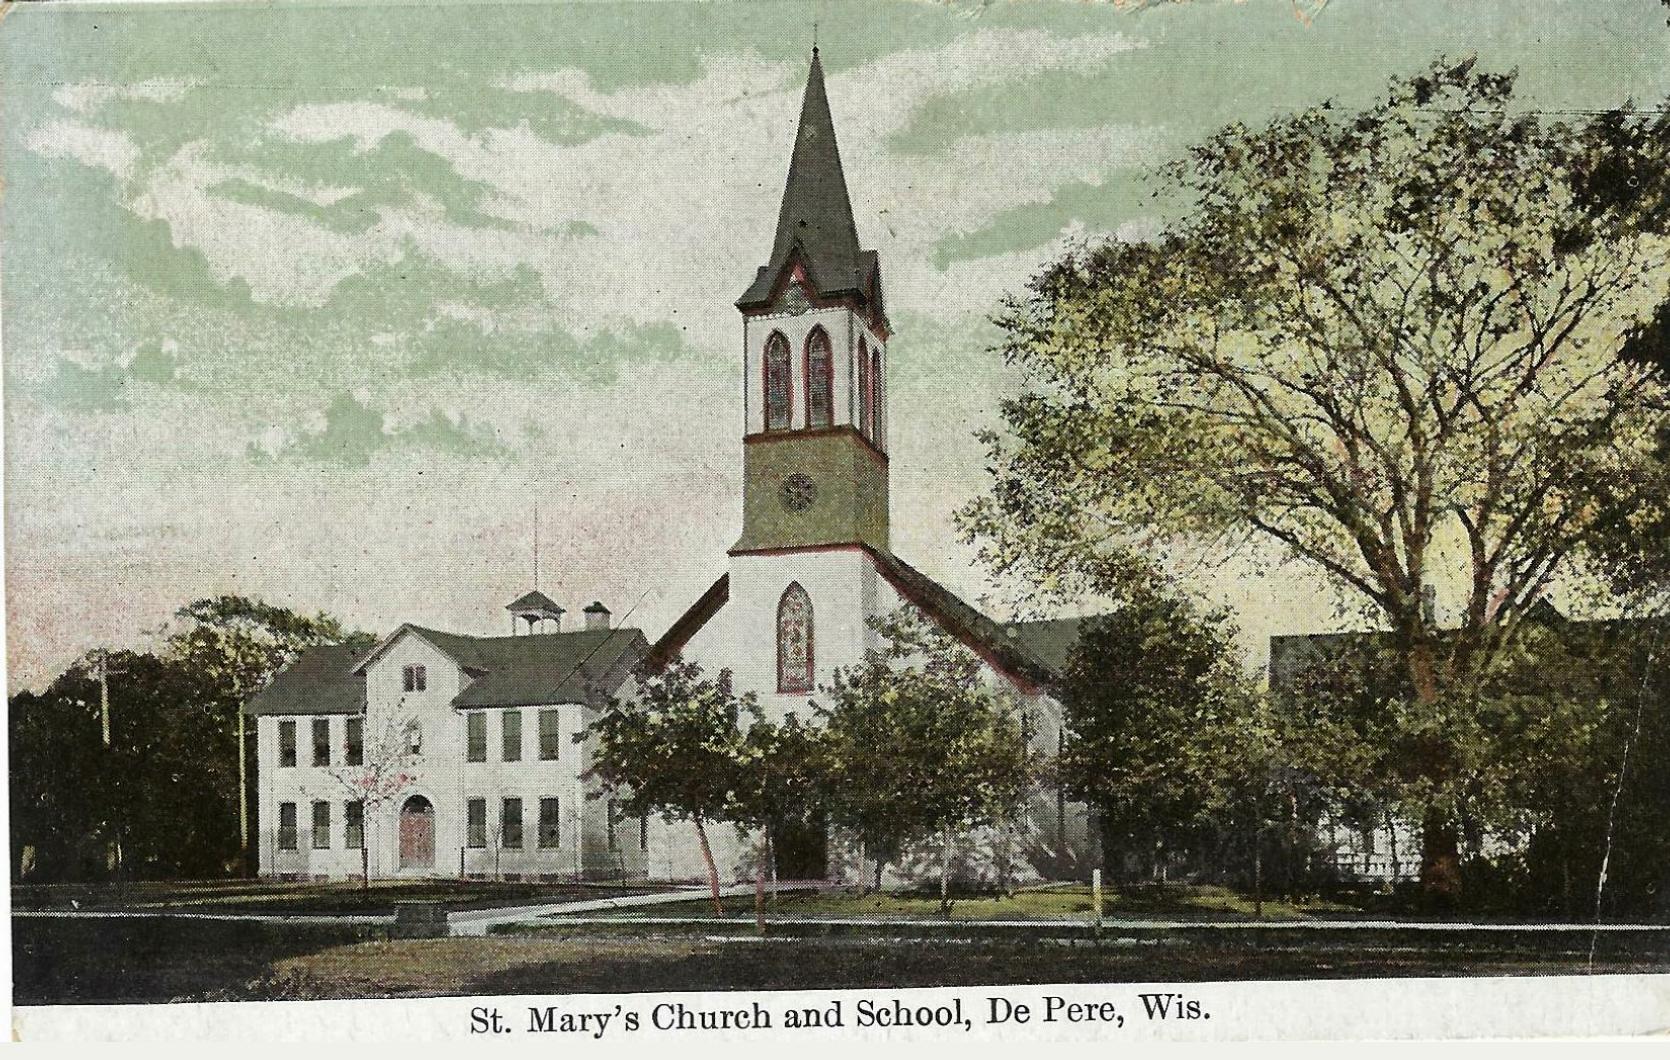 St. Mary's Church and School • UNKNOWN YEAR